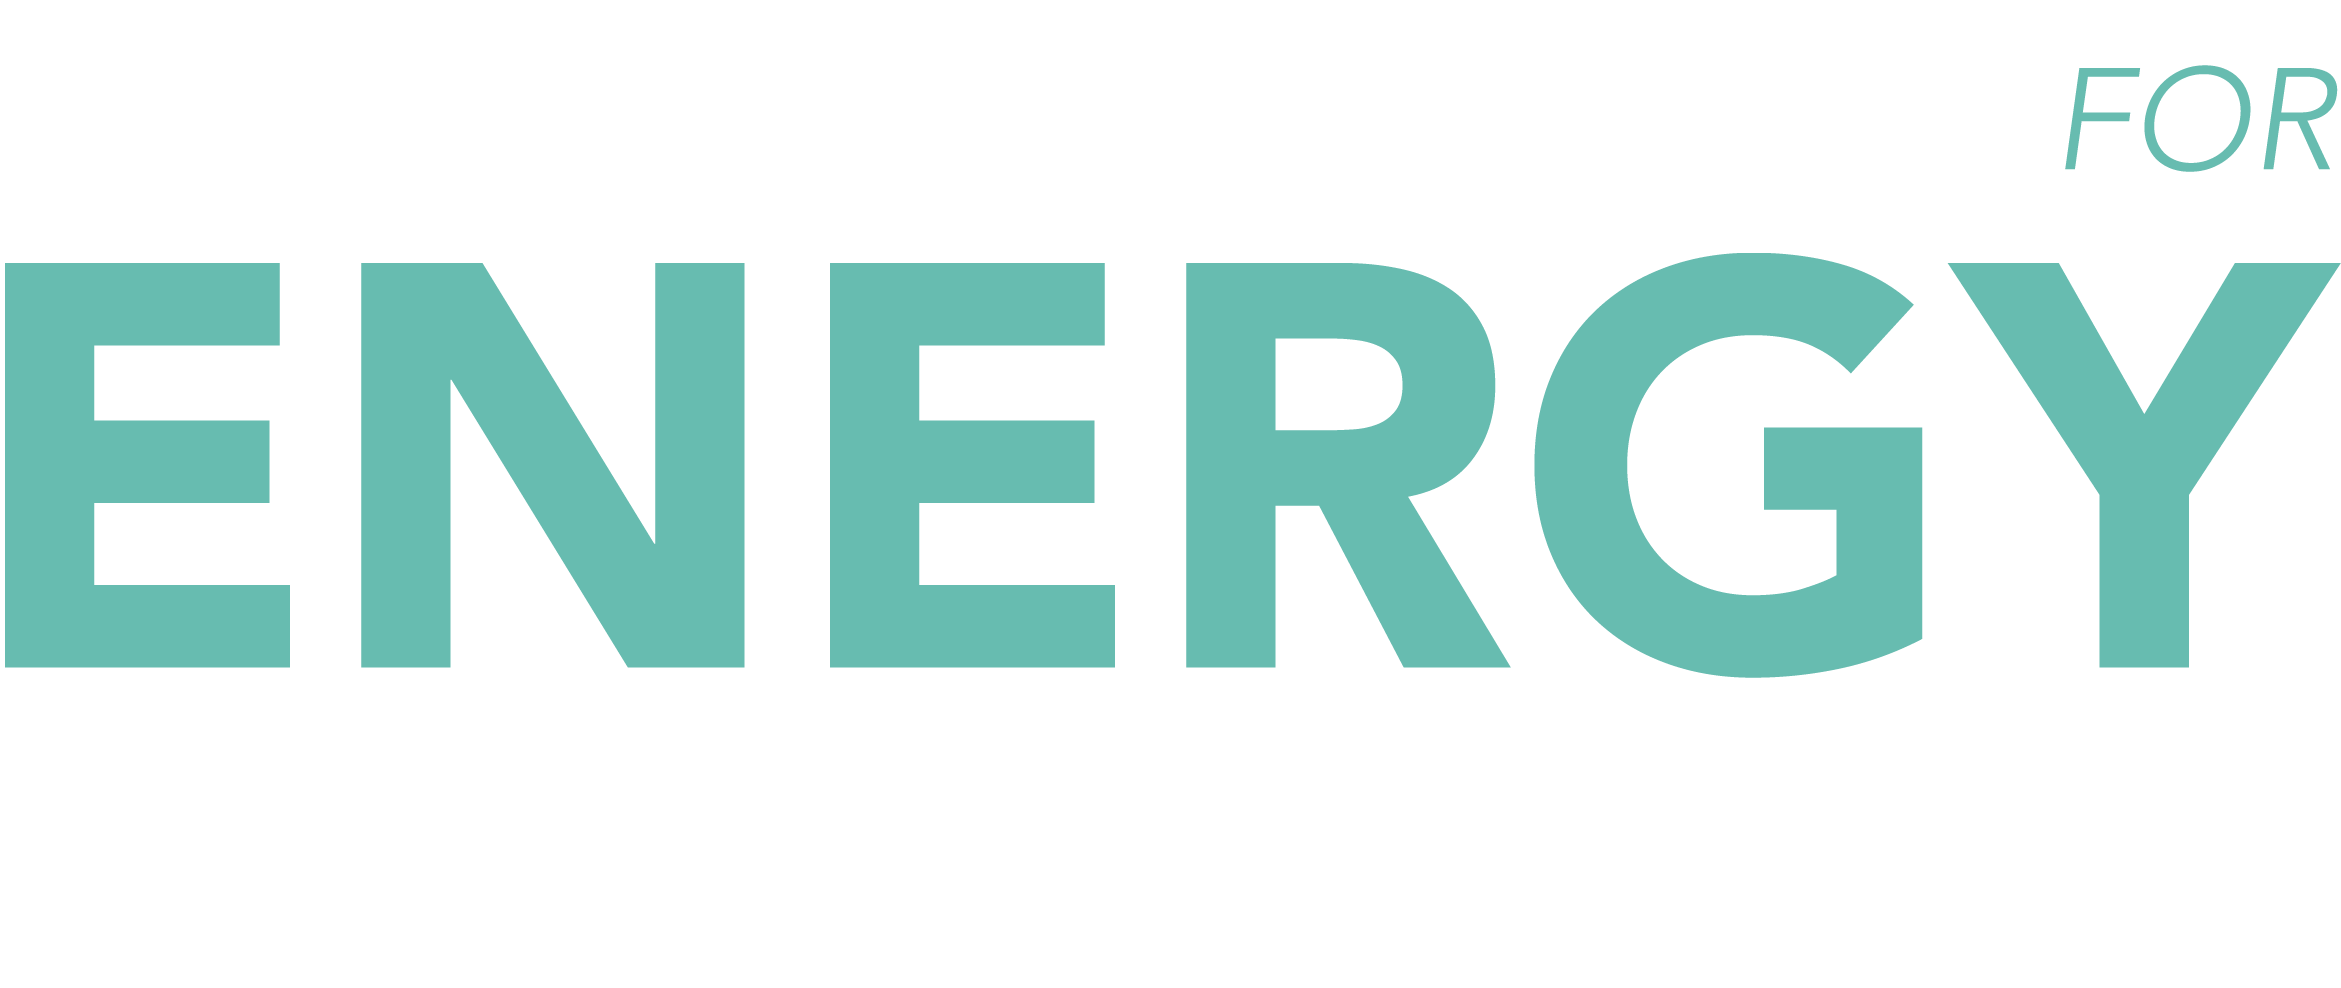 Monterey County Citizens for Energy Independence logo